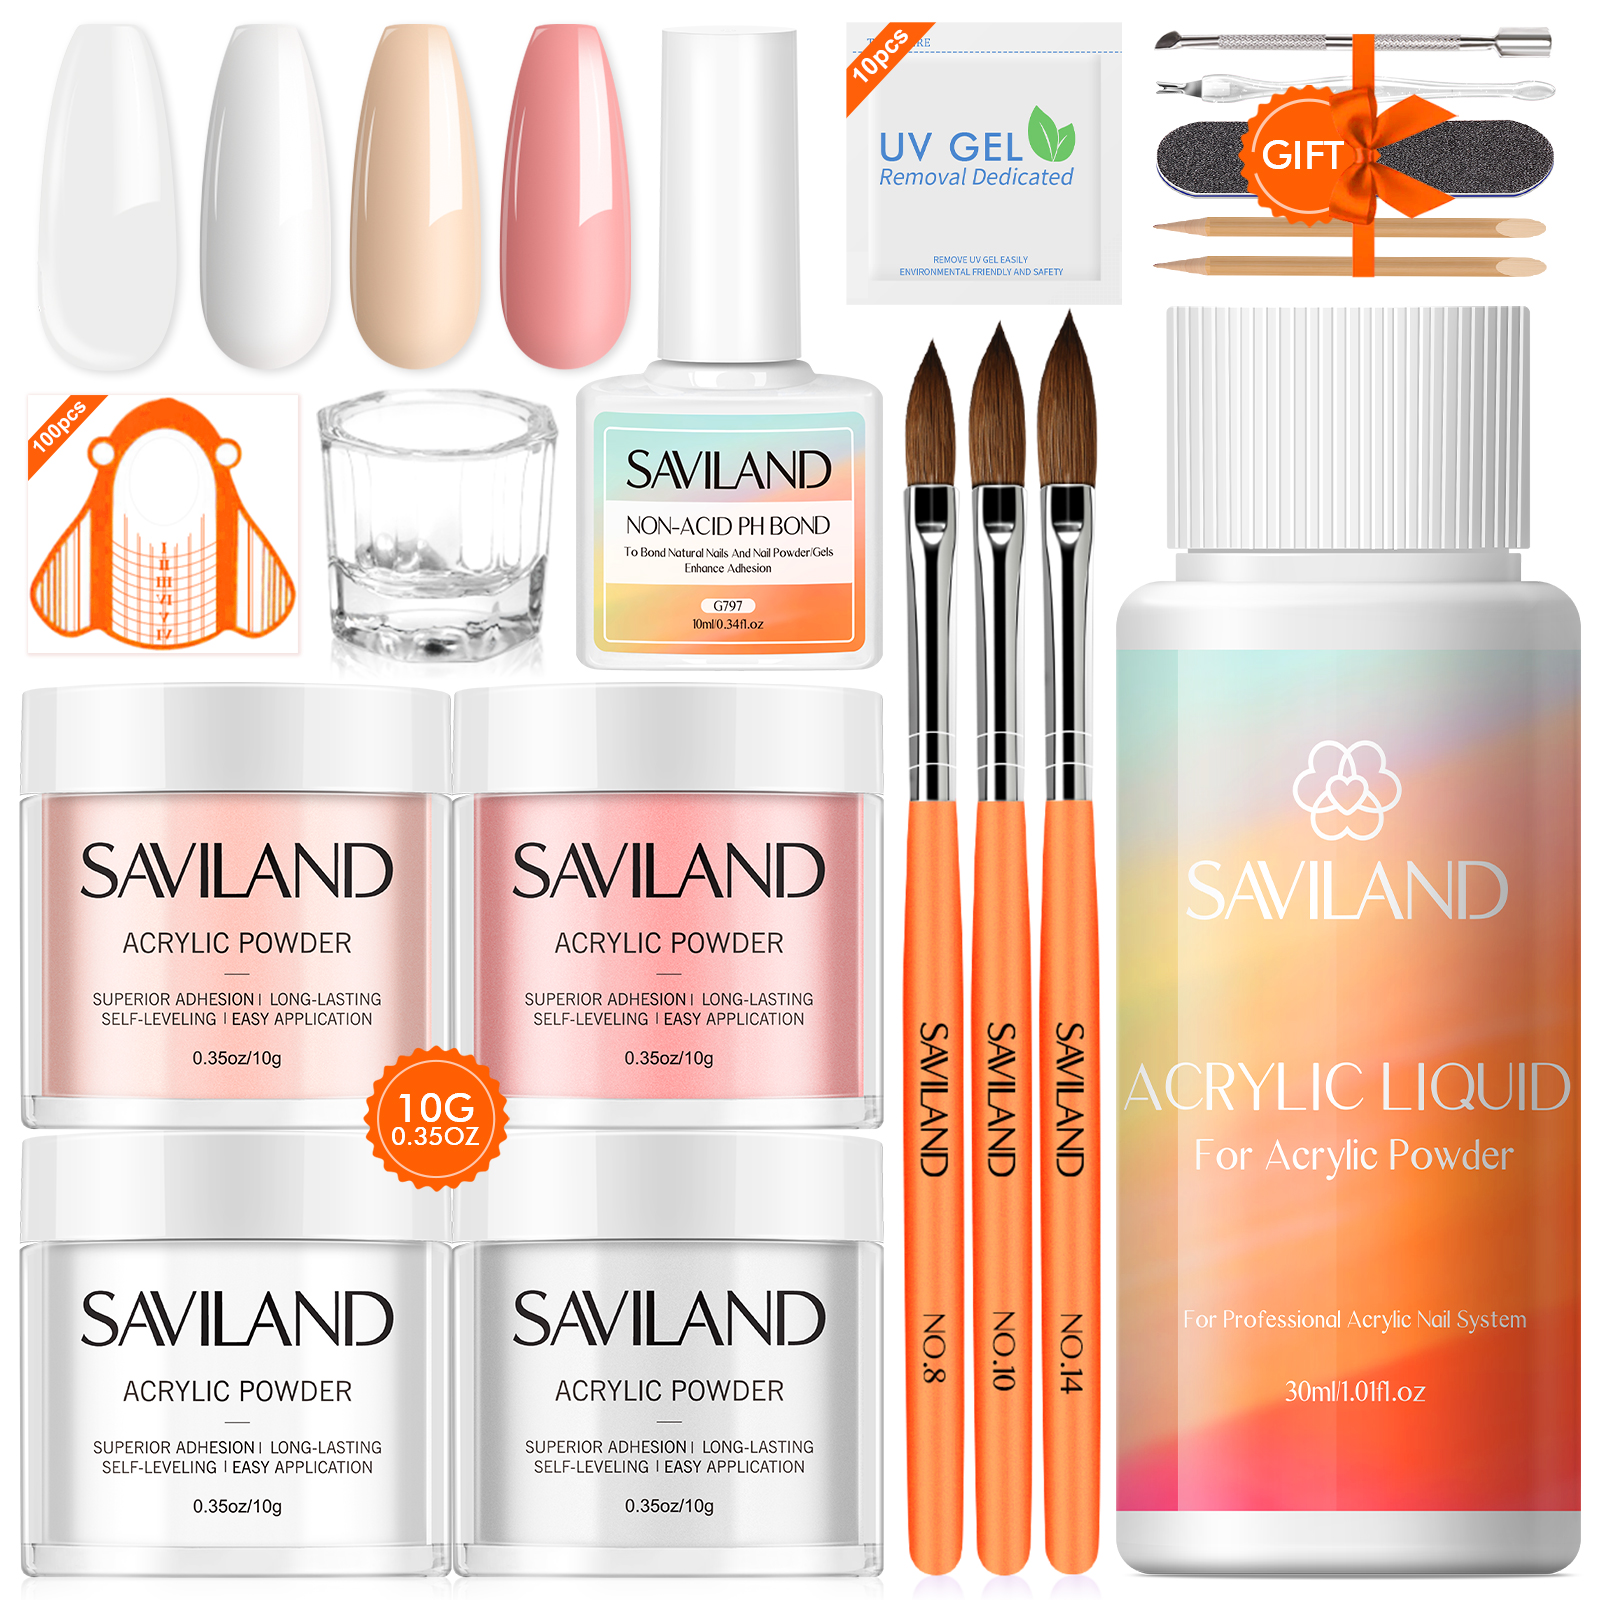 Saviland Acrylic Nail Kit- 4 Colors Clear/Pink/White/Nudes Acrylic Powder Set with Monomer Acrylic Liquid, Acrylic Nail Brush, Acid-Free Primer for Nail Extension with Everything - image 1 of 10